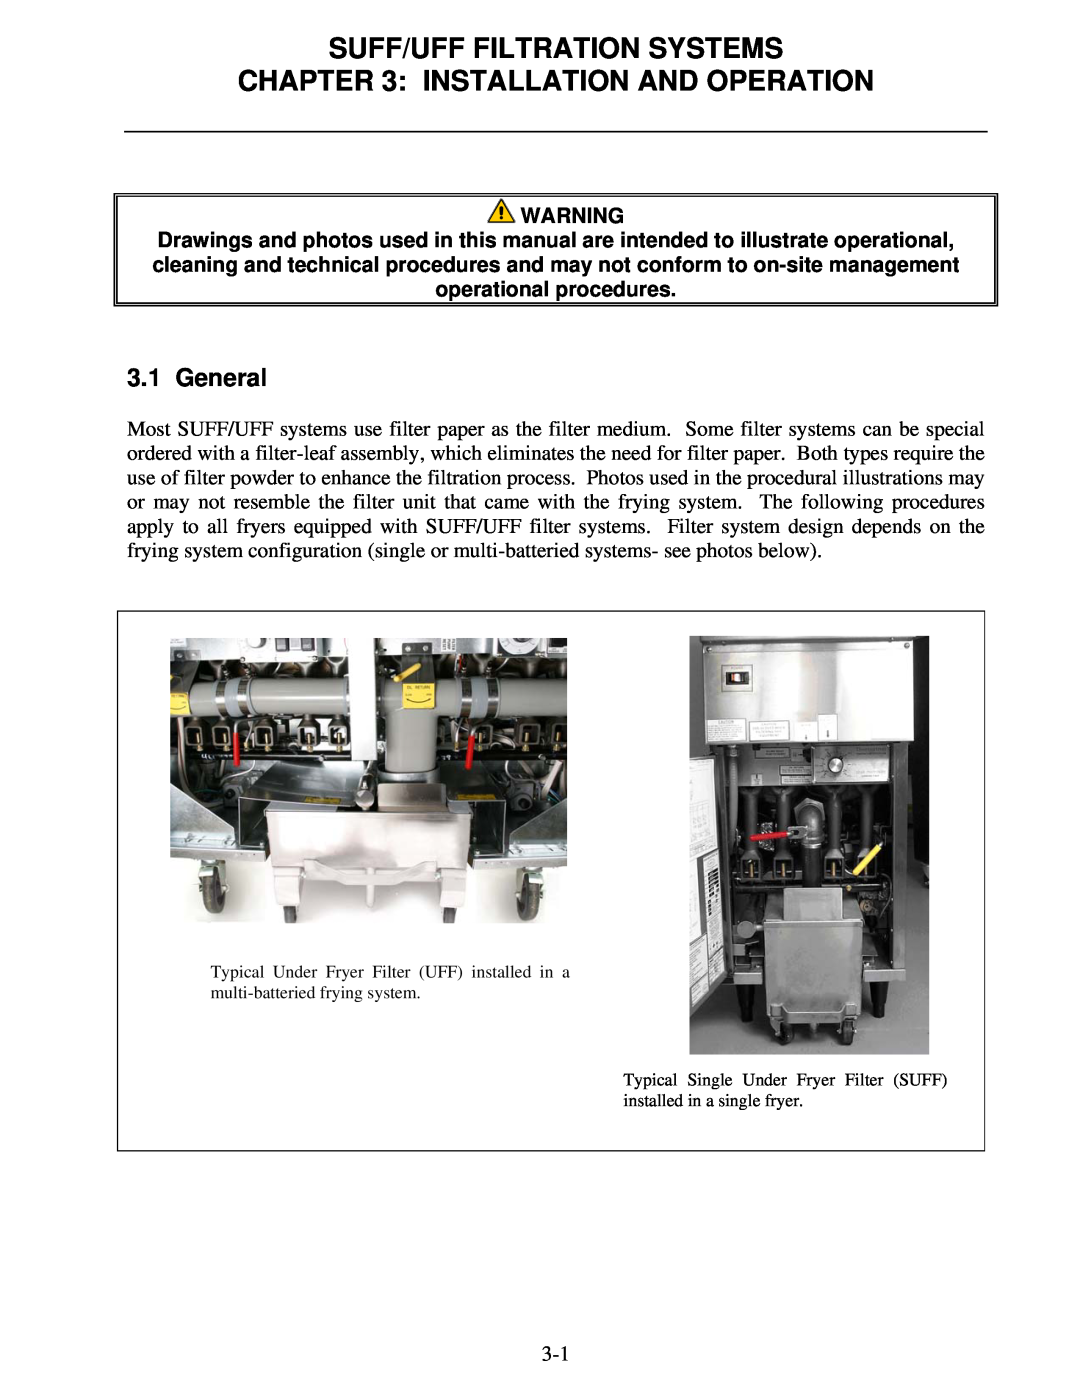 Frymaster 8195809 operation manual Suff/Uff Filtration Systems Installation And Operation, General 